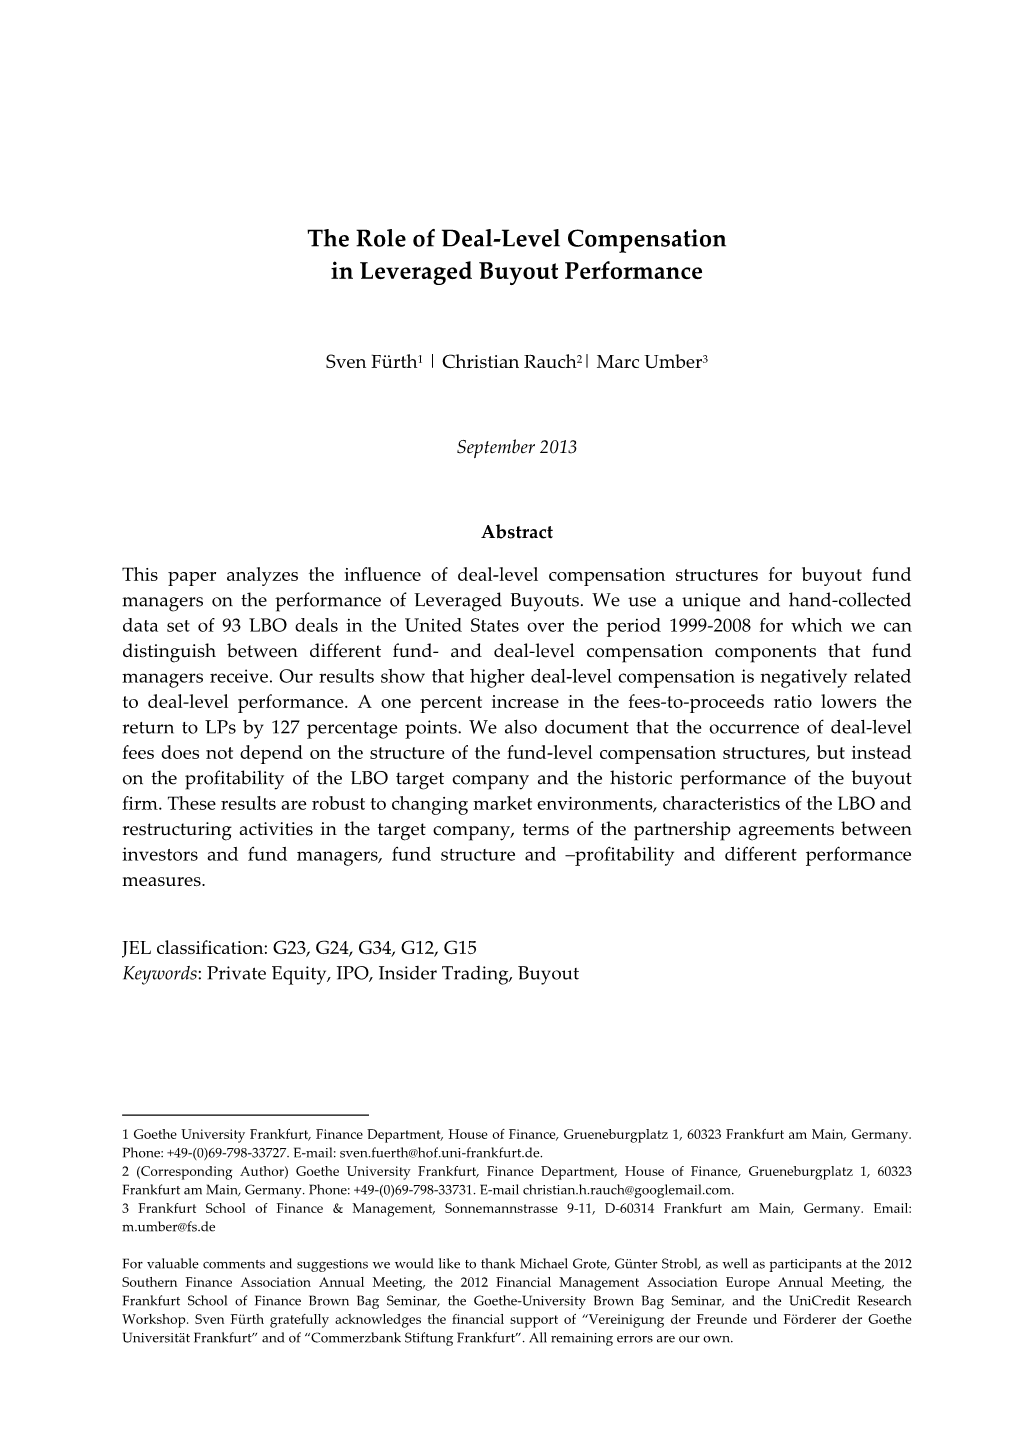 The Role of Deal-Level Compensation in Leveraged Buyout Performance